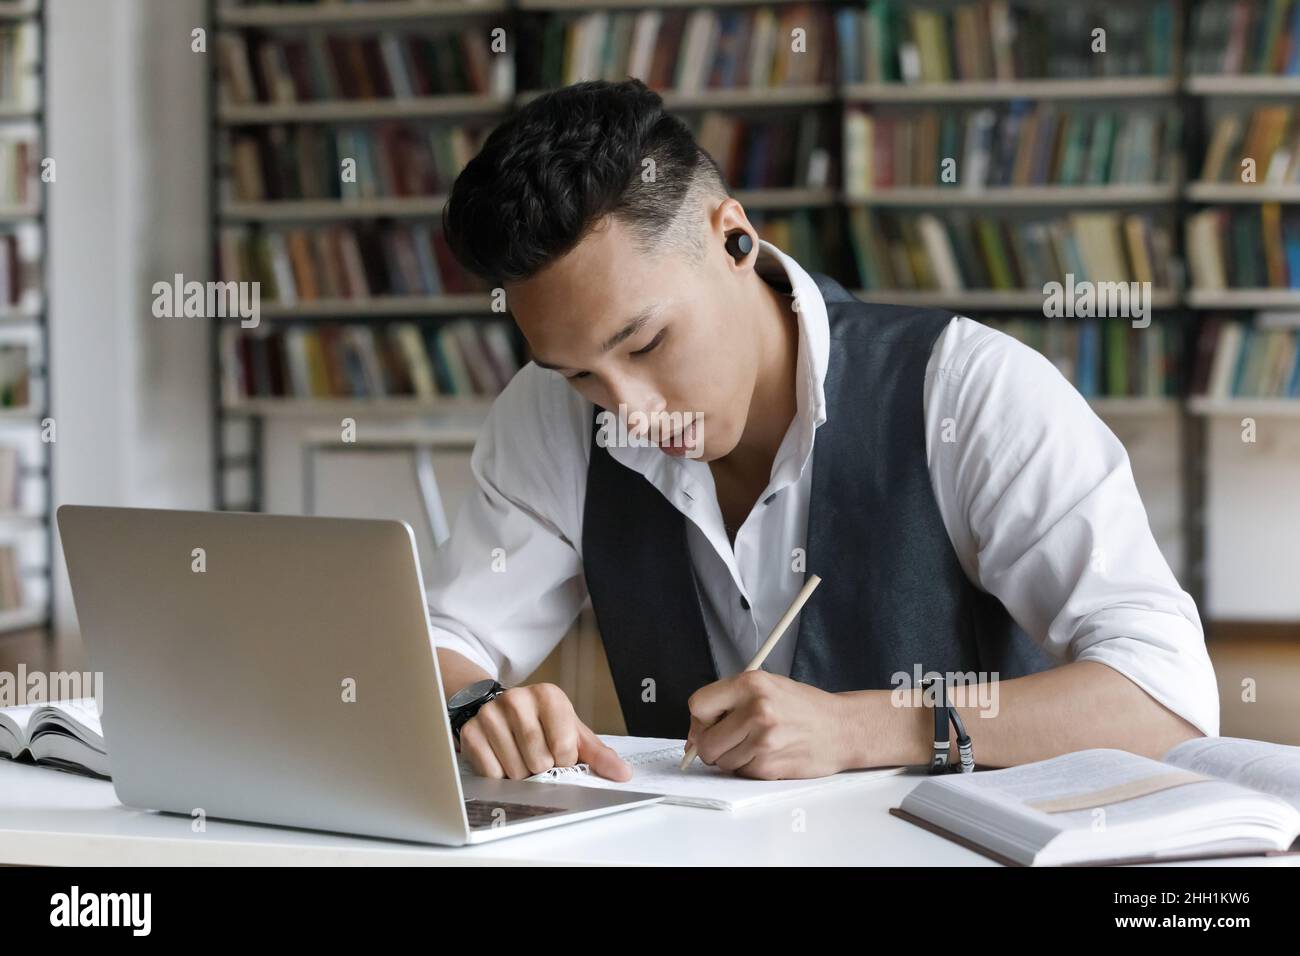 Focused serious Asian student guy with wireless earphones writing notes Stock Photo